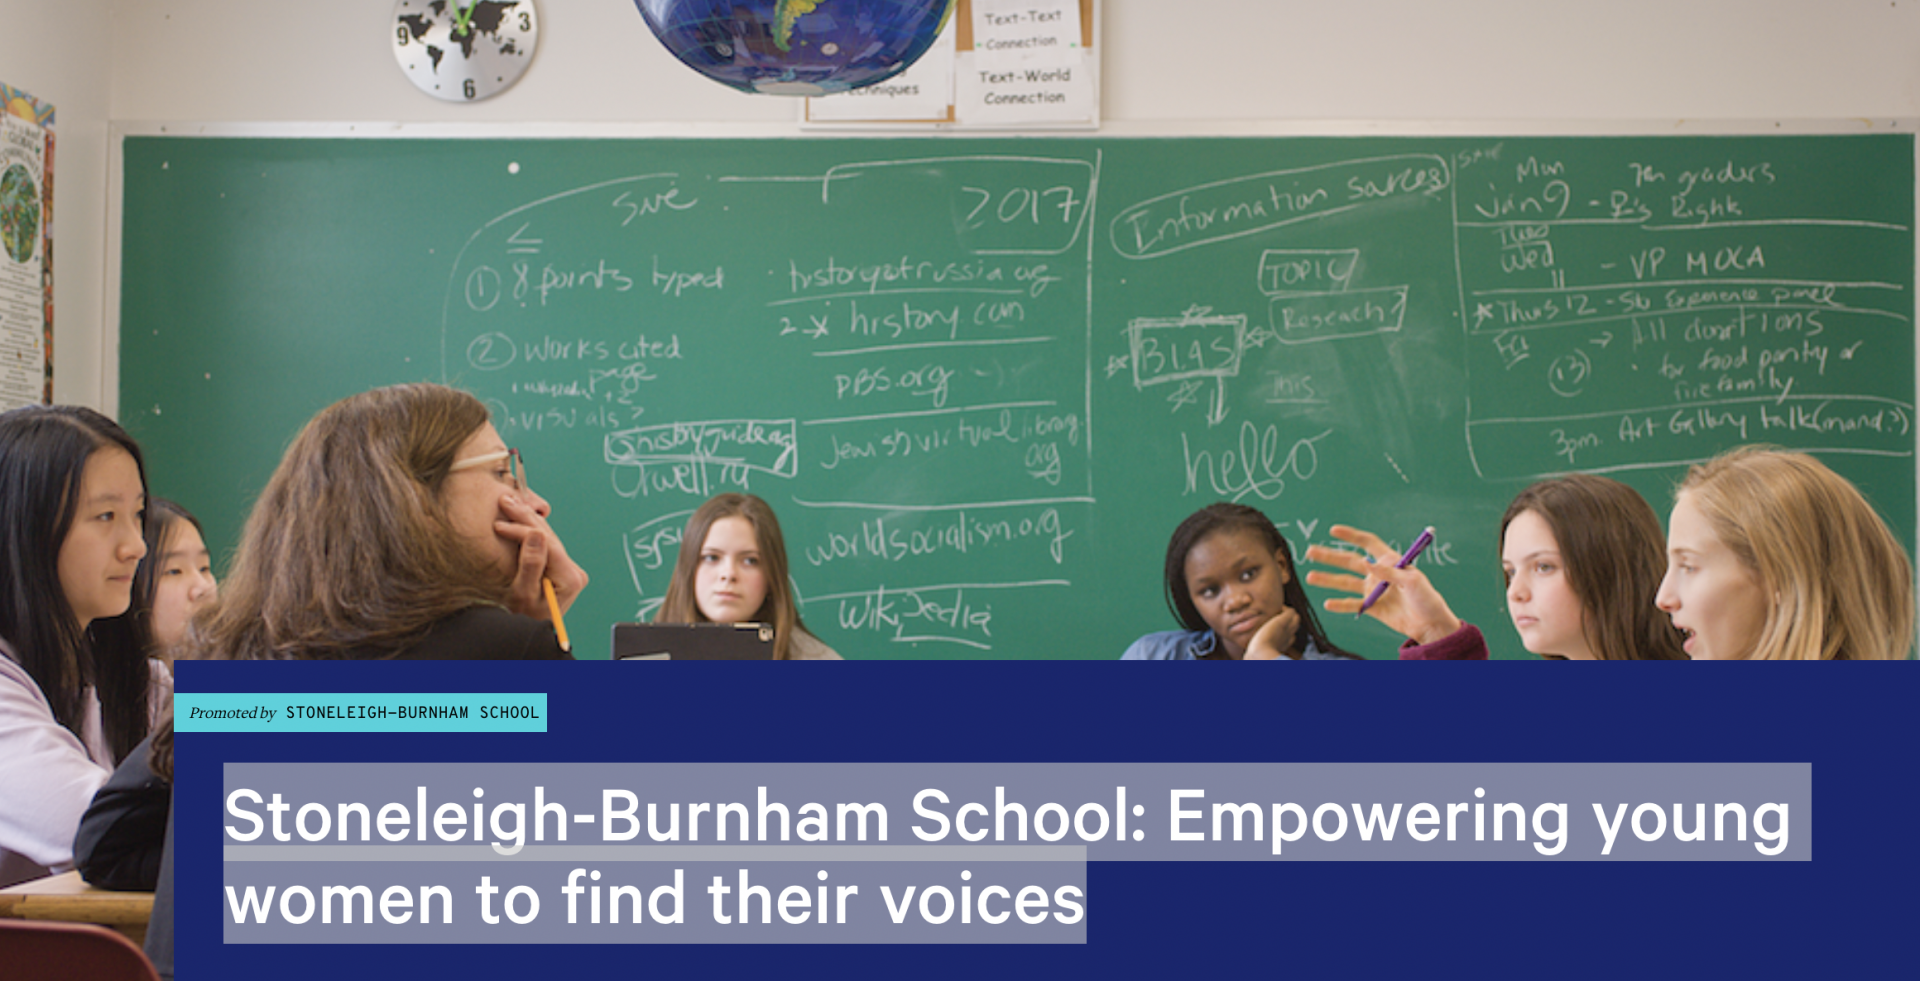 Empowering young women to find their voices